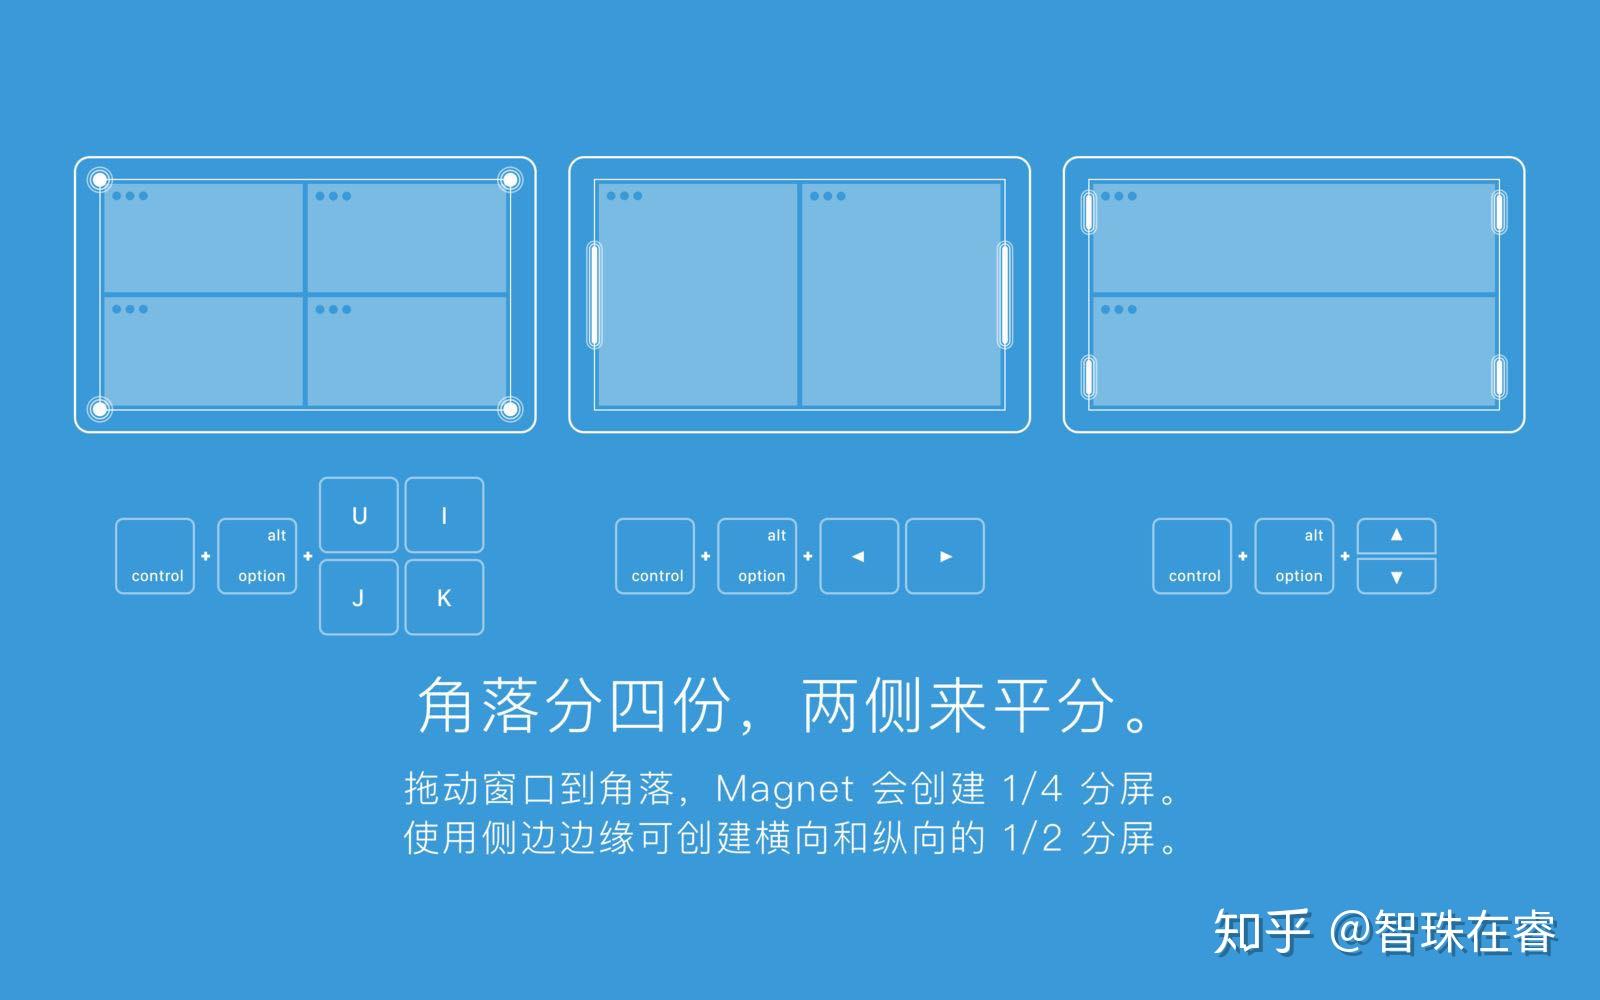 magnet window manager mac